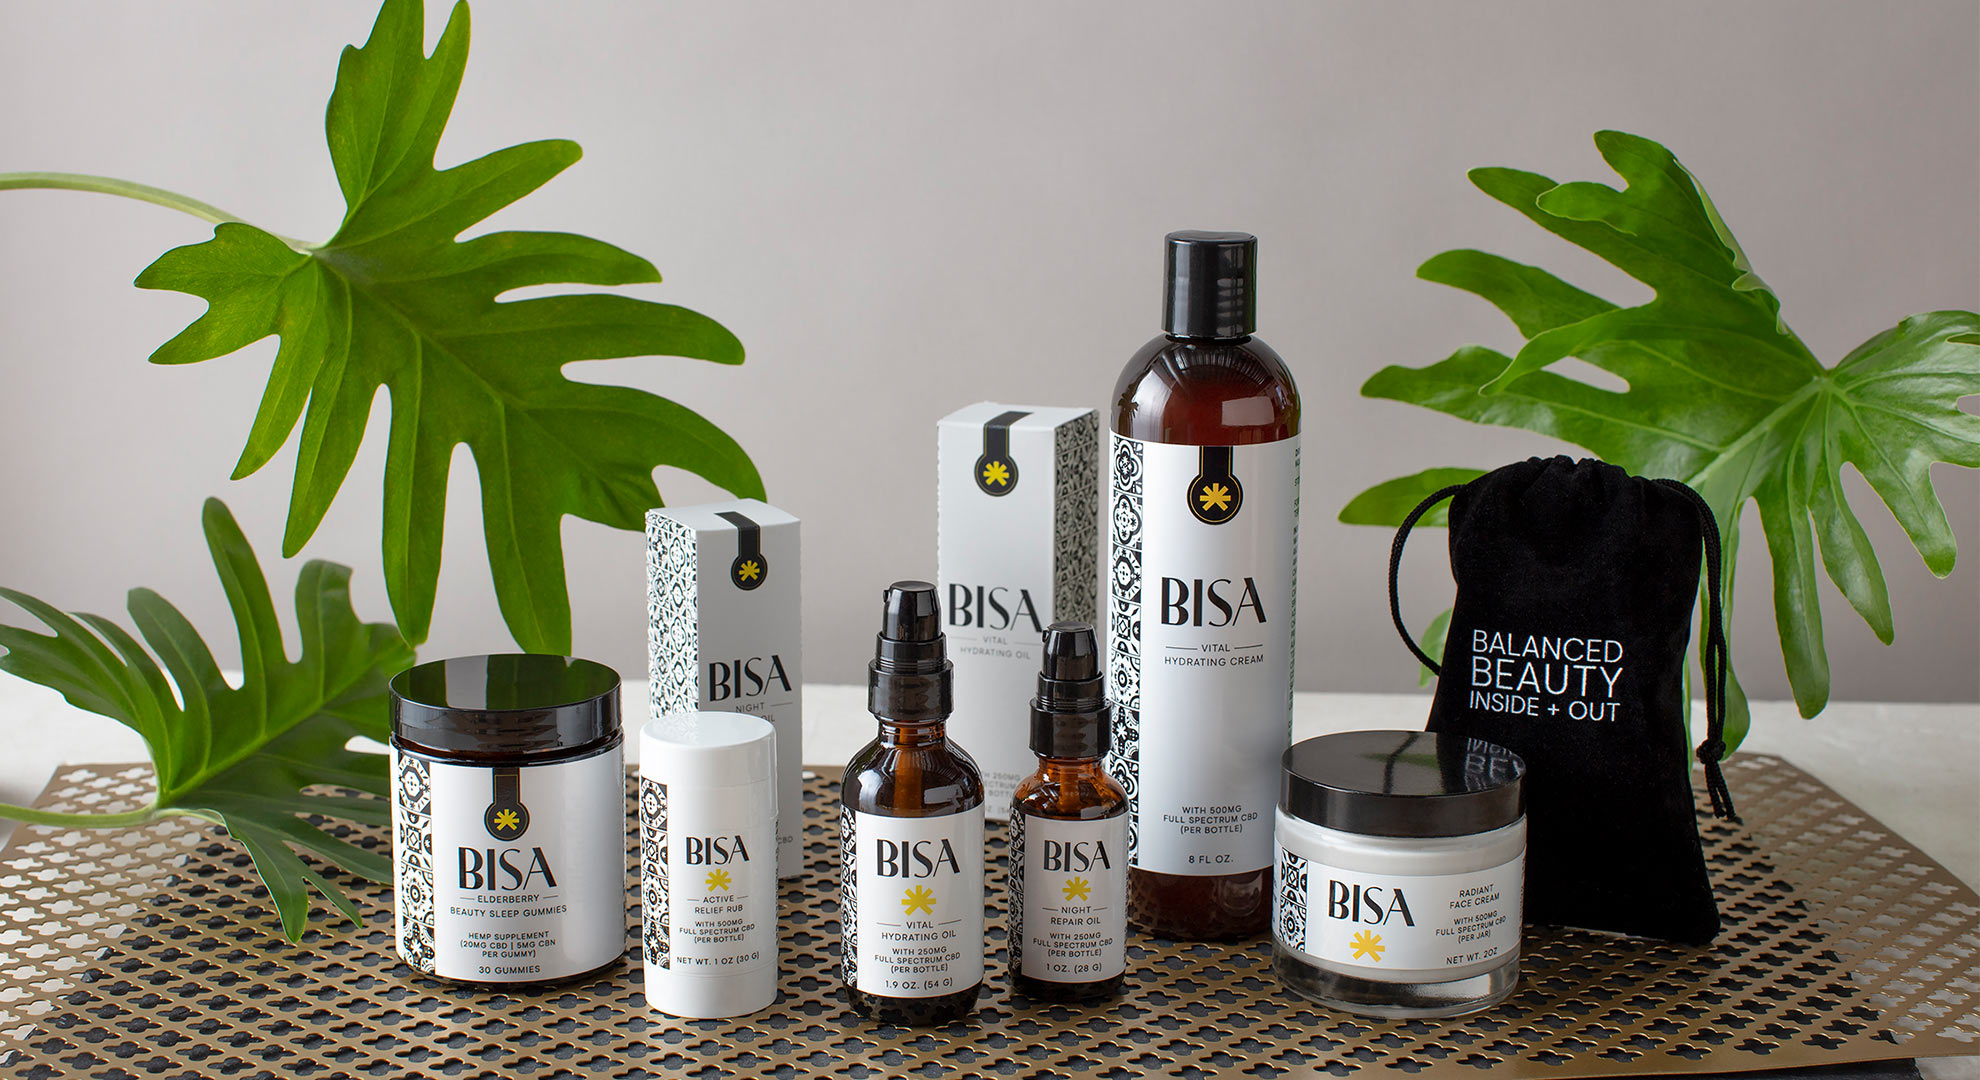 BISA - Balanced Beauty Inside + Out